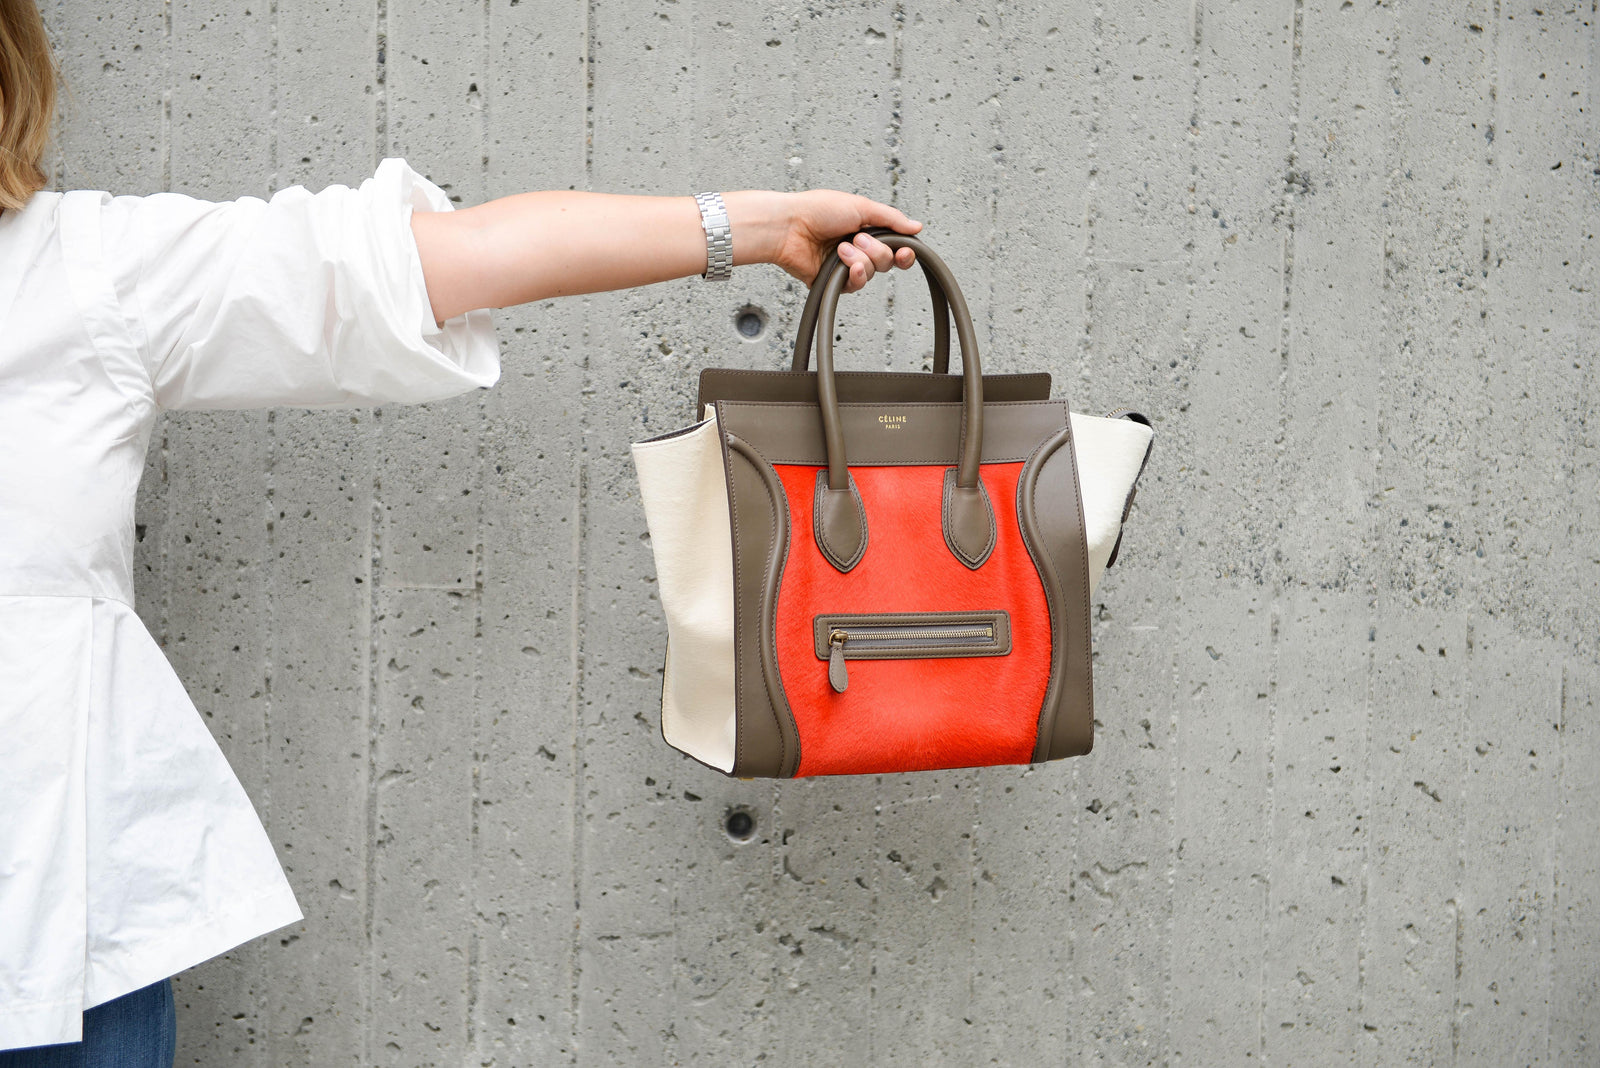 The Story Behind the Iconic Celine Luggage Tote